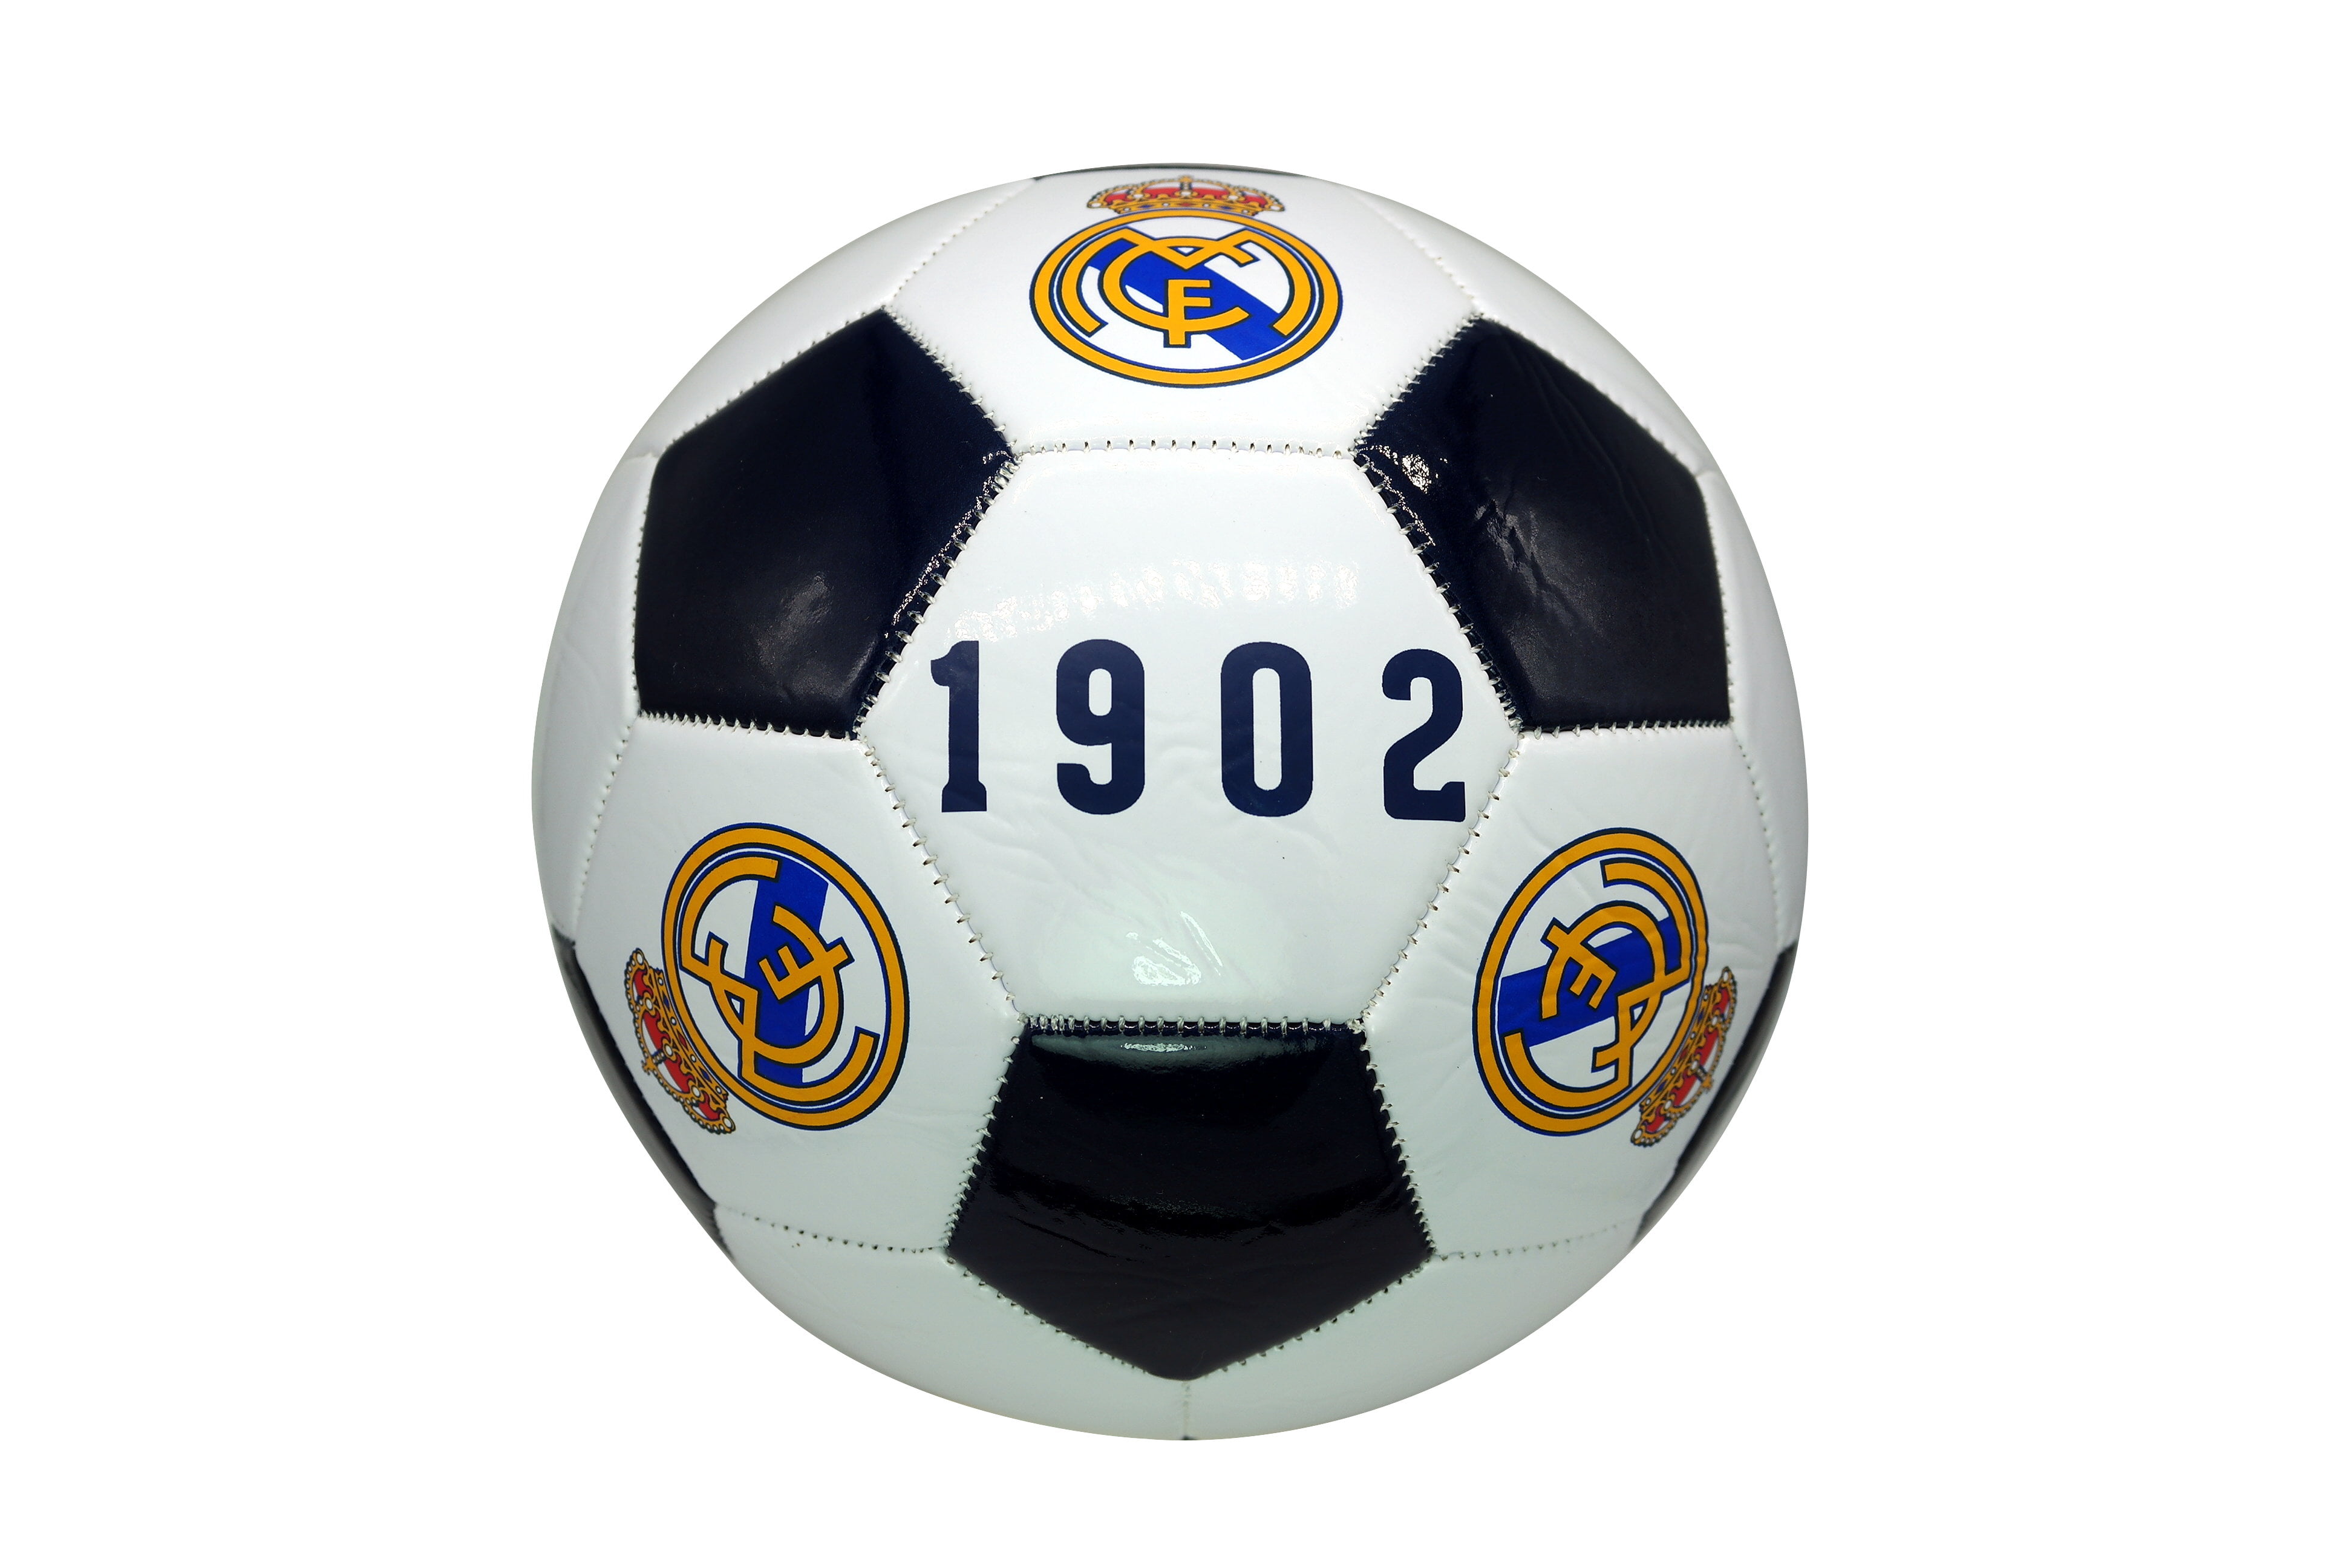 Authentic Official Licensed Soccer Ball Size 3 Real Madrid C.F 